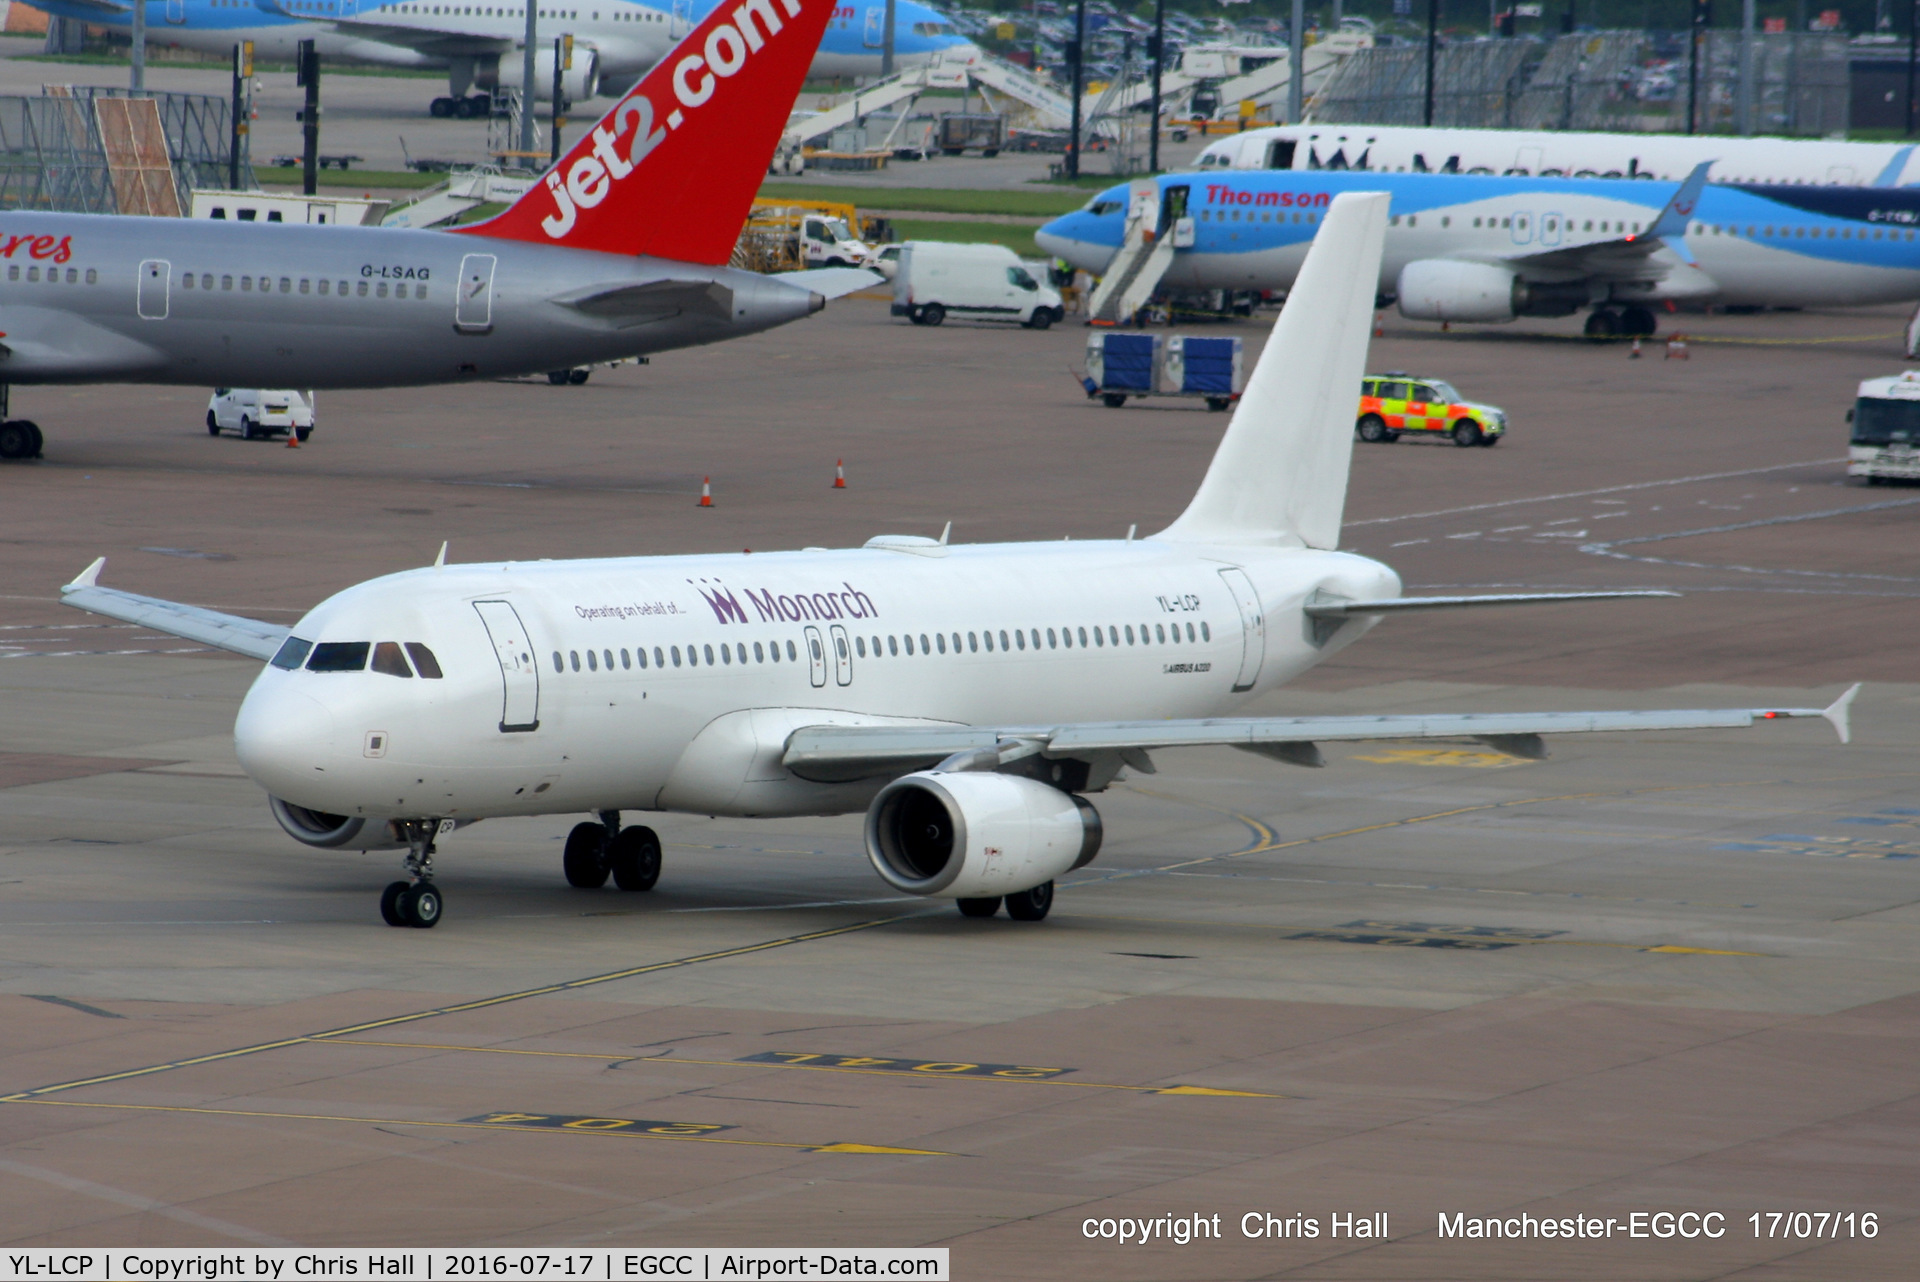 YL-LCP, 2008 Airbus A320-232 C/N 1823, SmartLynx operating for Monarch